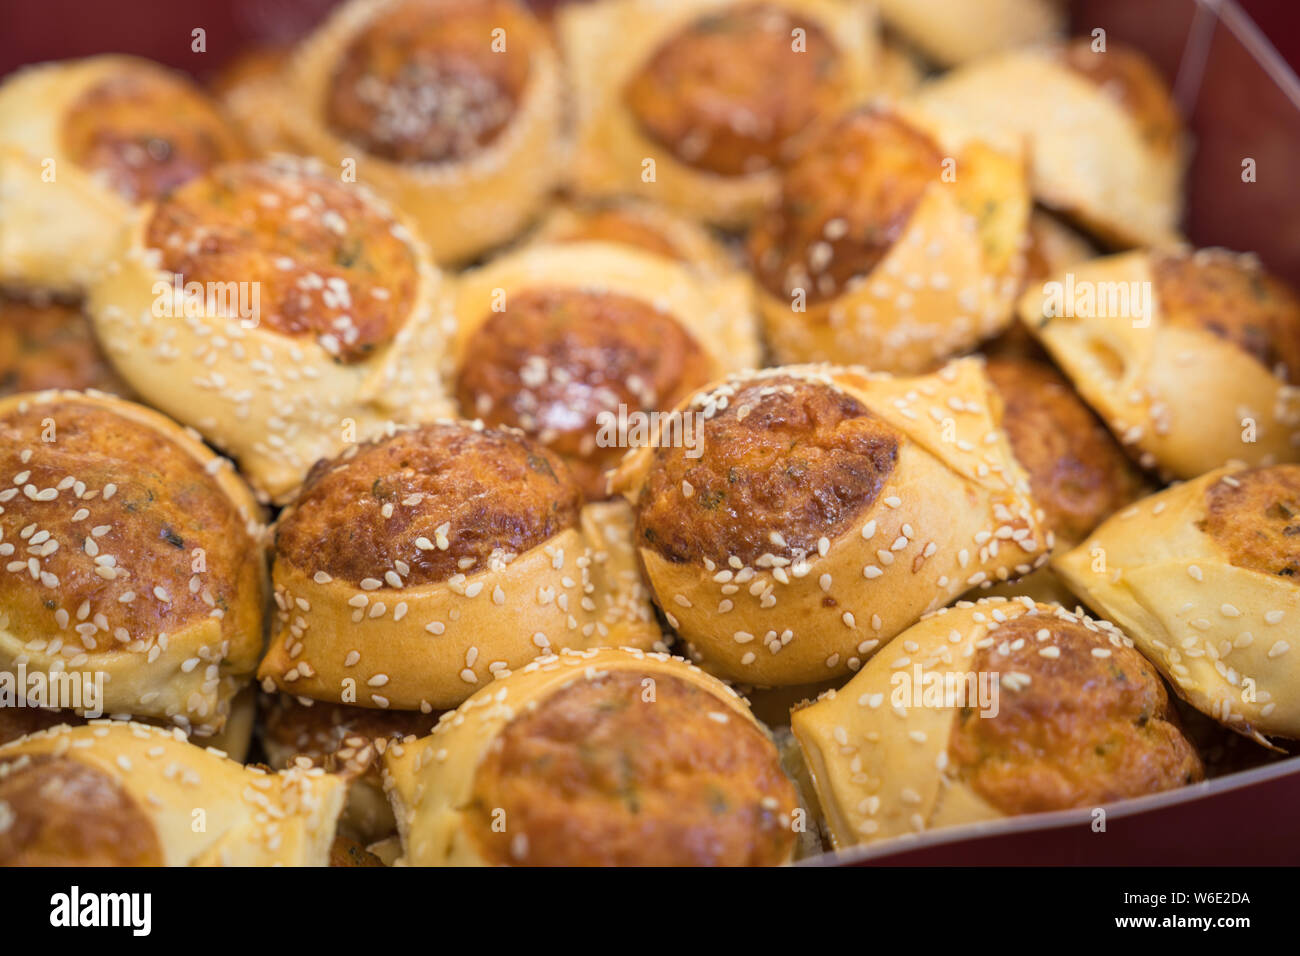 Flaounes are savoury Easter pastries that contain goats cheese (or a variety of cheeses), eggs, spices and herbs all wrapped in a yeast pastry. Stock Photo